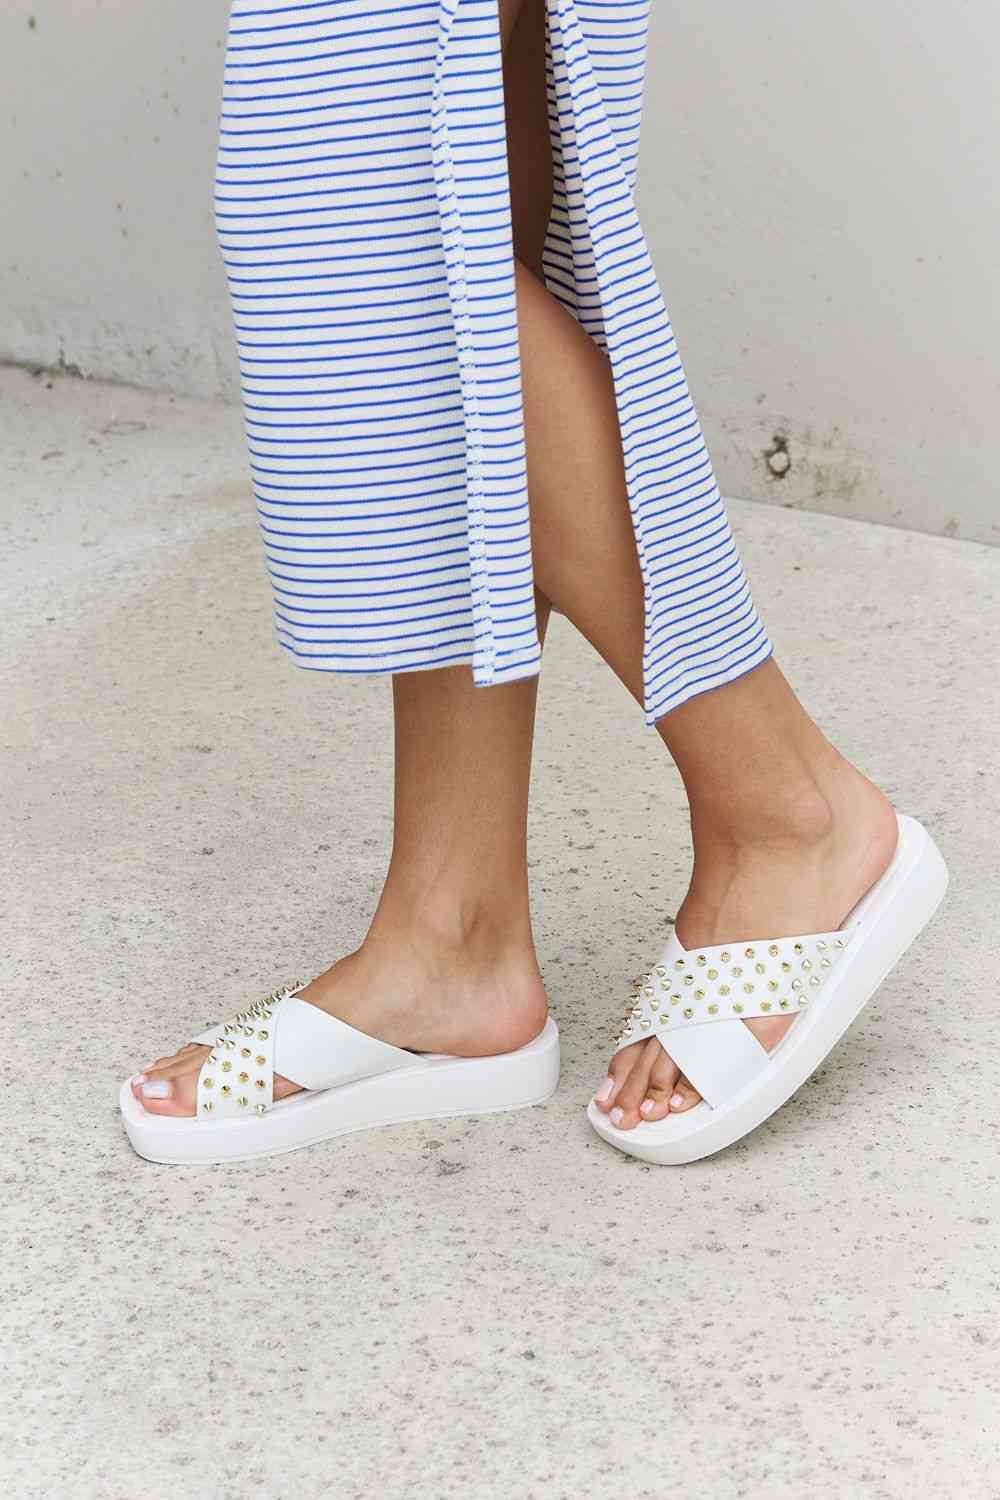 Studded Cross Strap Sandals in White - Kawaii Stop - Casual Style, Chic Comfort, Cross Strap Design, Faux Leather, Flat Heels, Flats, Forever Link, Modern Sophistication, Ship from USA, Slippers